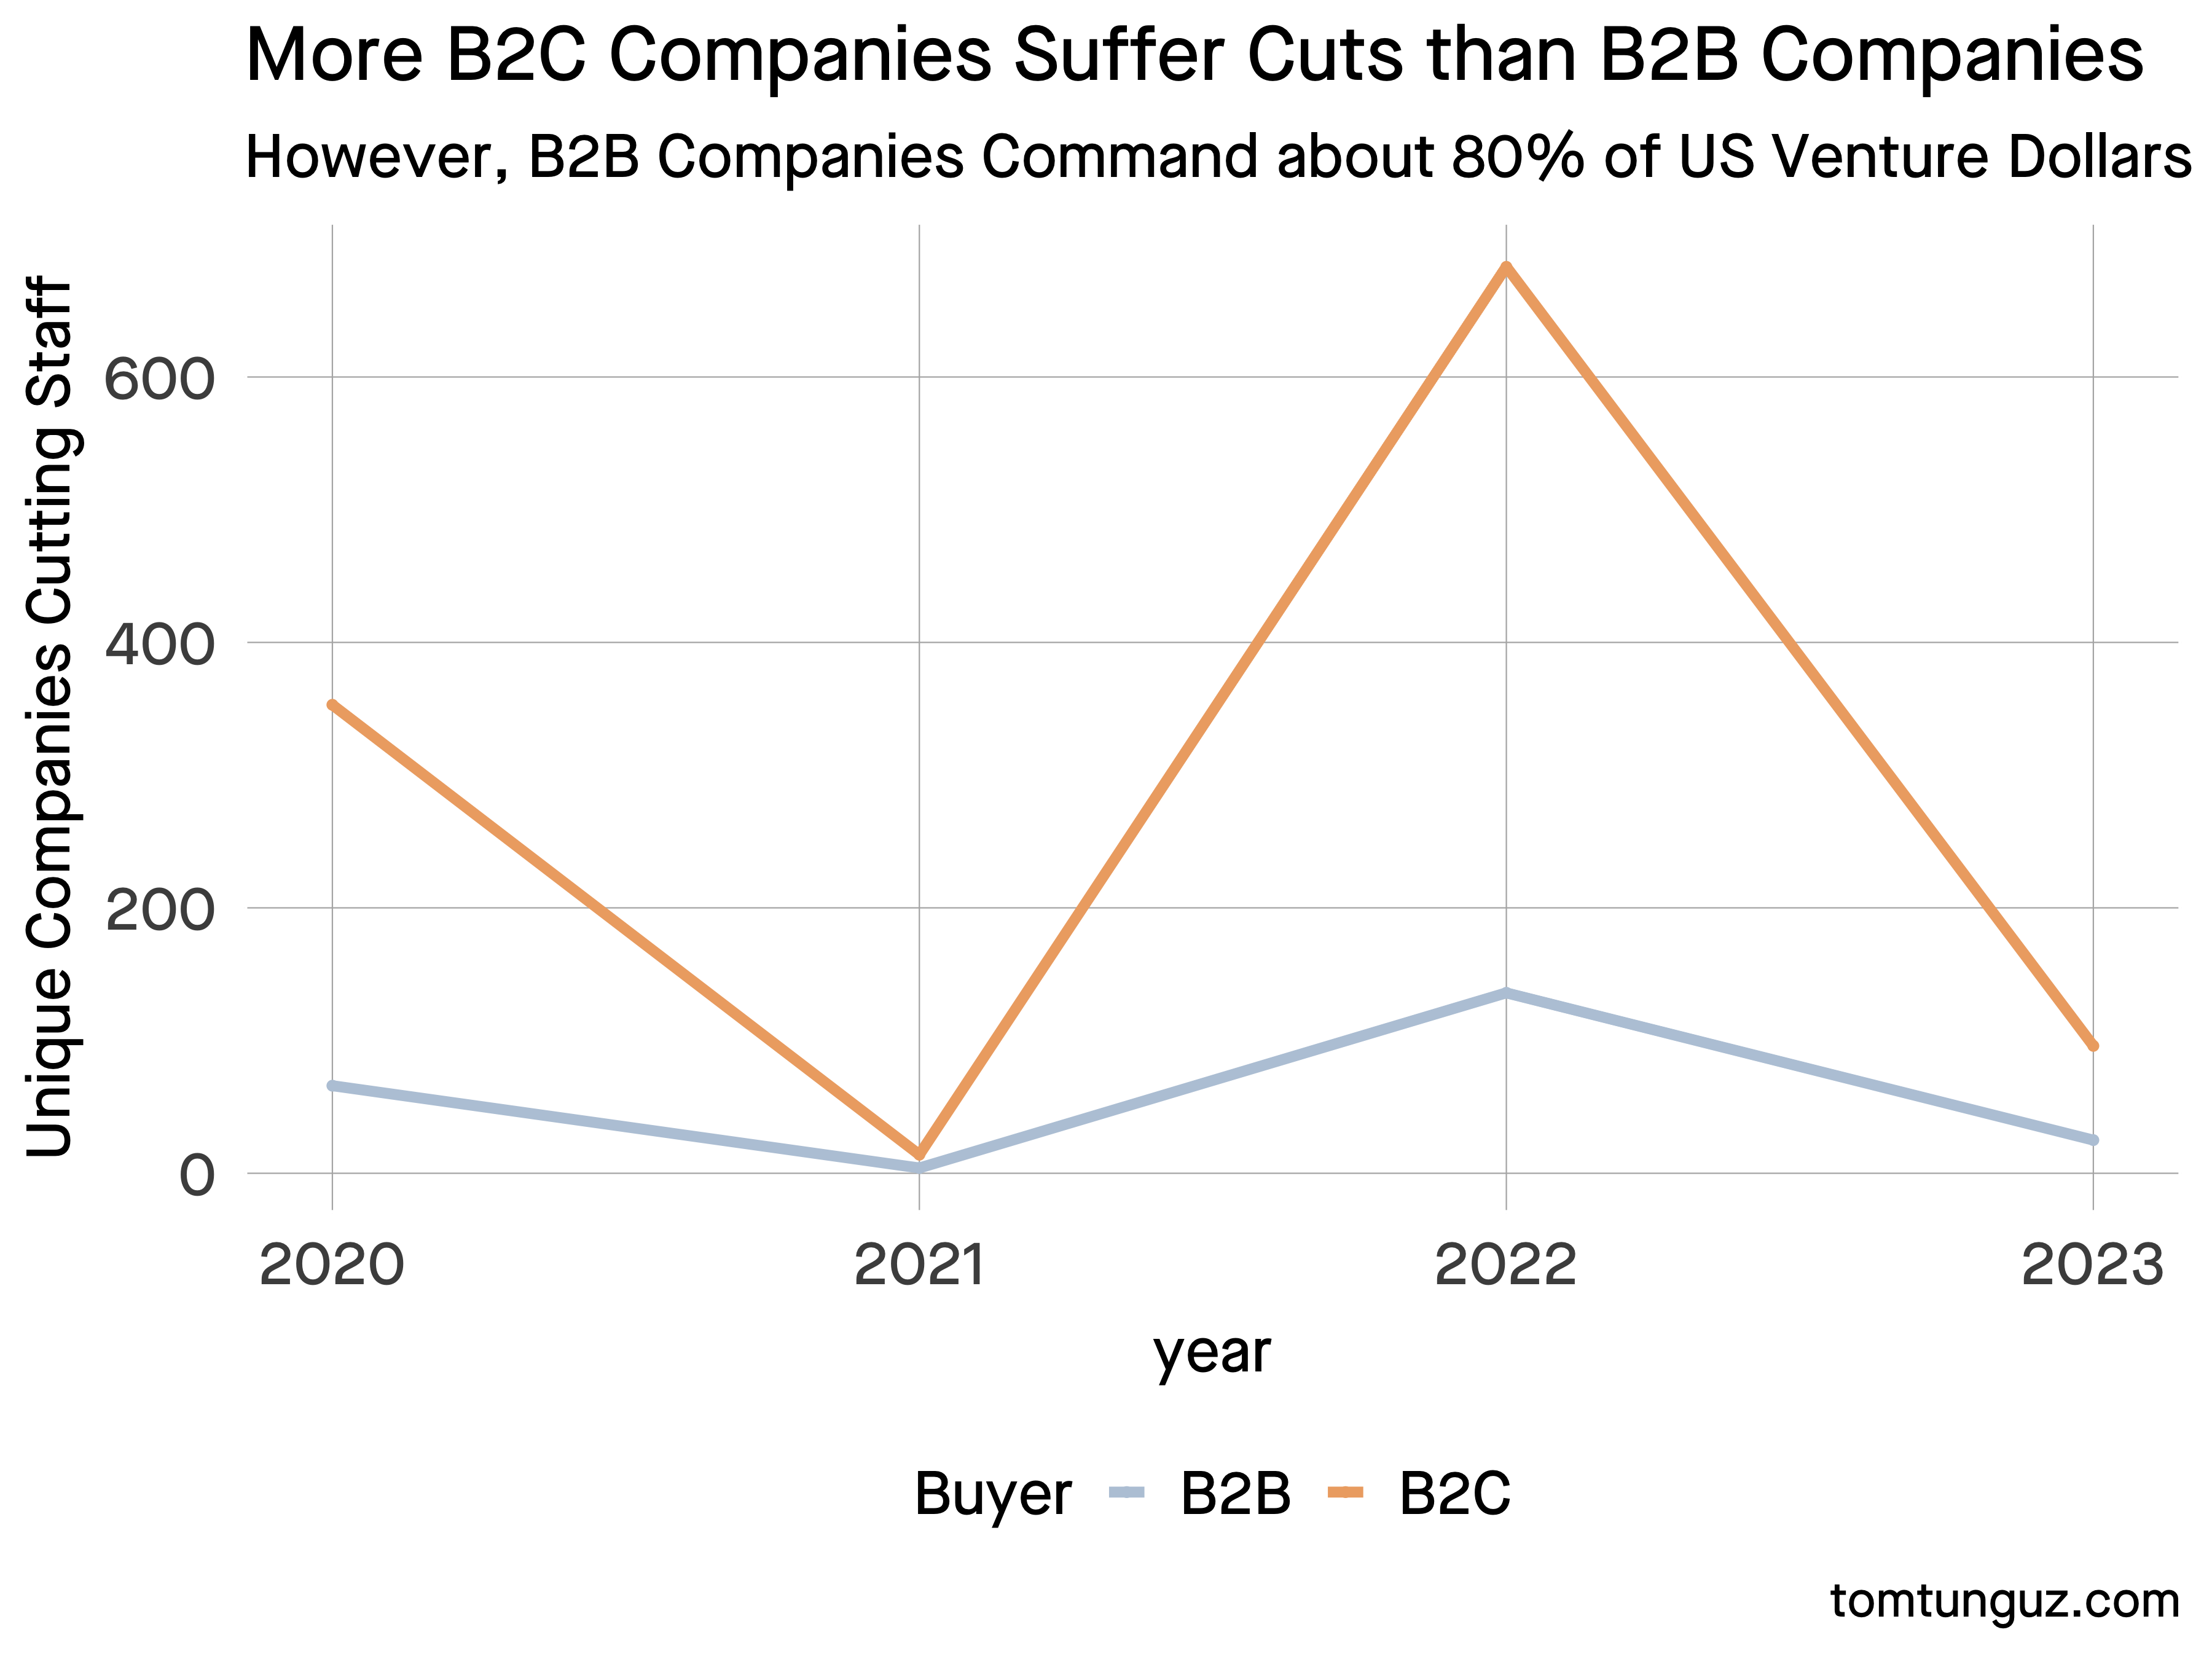 &ldquo;count of companies cutting staff by year from 2020-2023 by buyer&rdquo;